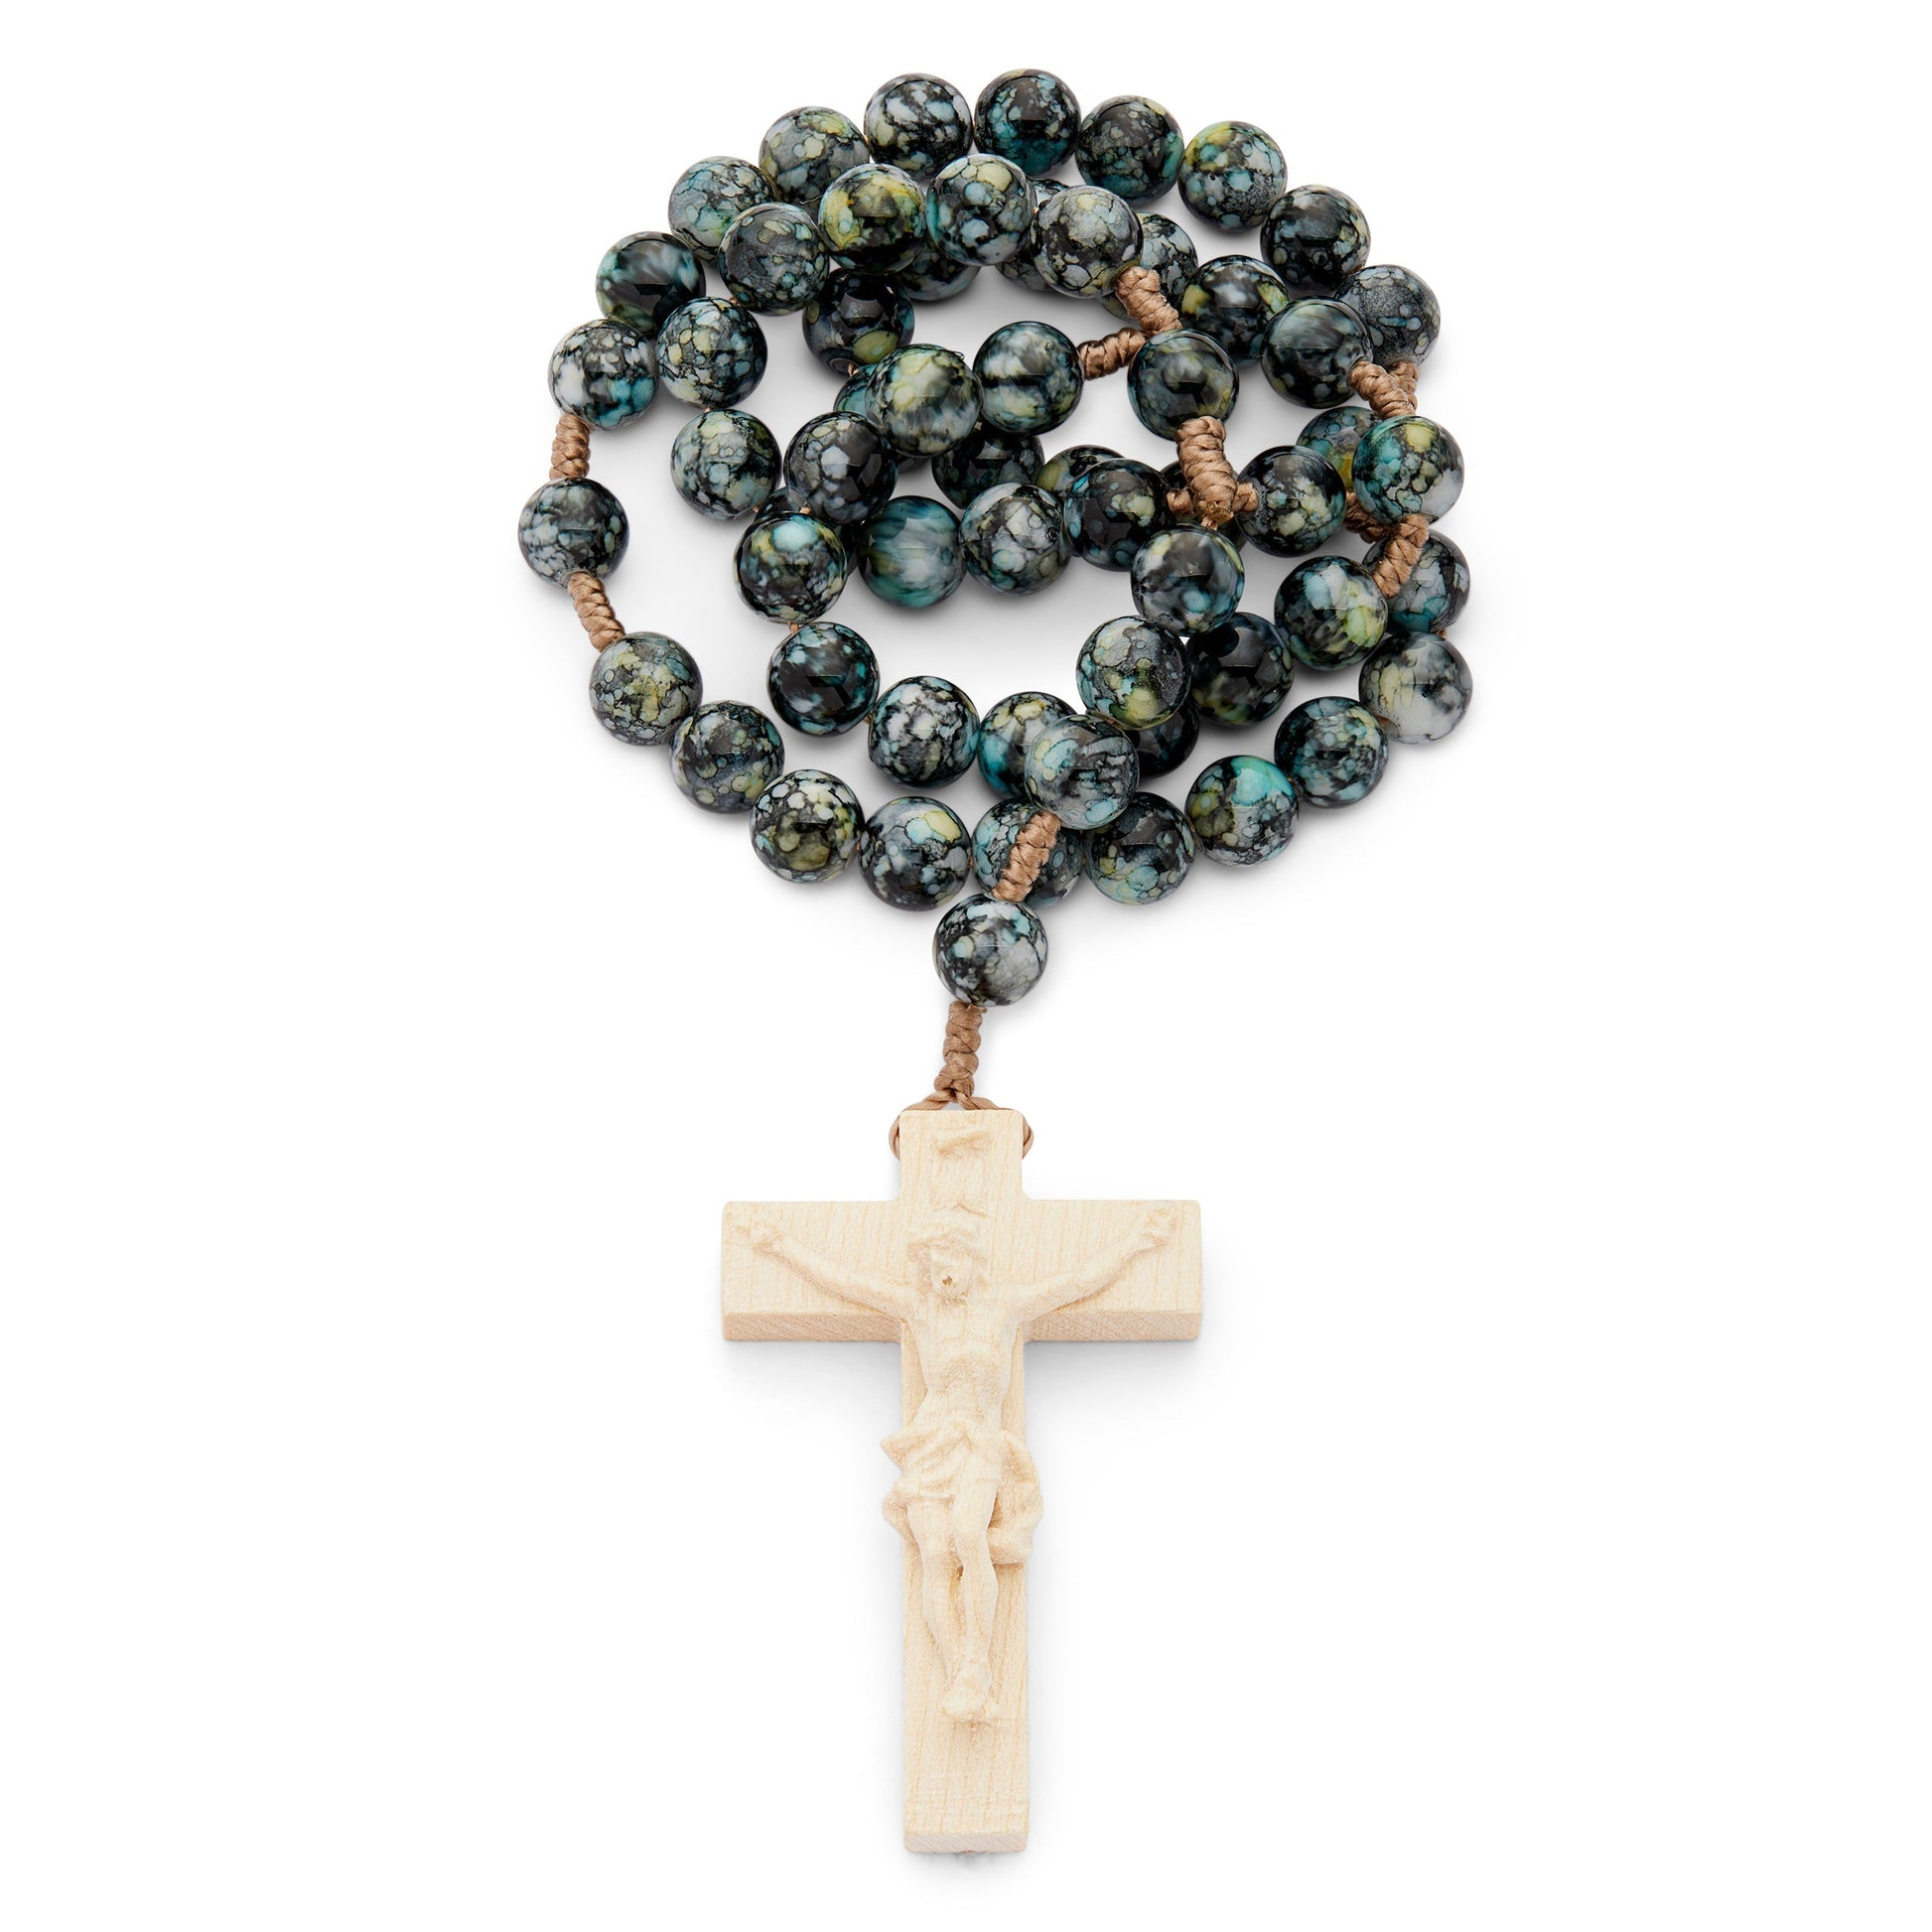 MONDO CATTOLICO Prayer Beads 35.5 cm (13.97 in) / 7 mm (0.27 in) Resin Rosary in Rope with Natural Wood Crucifix